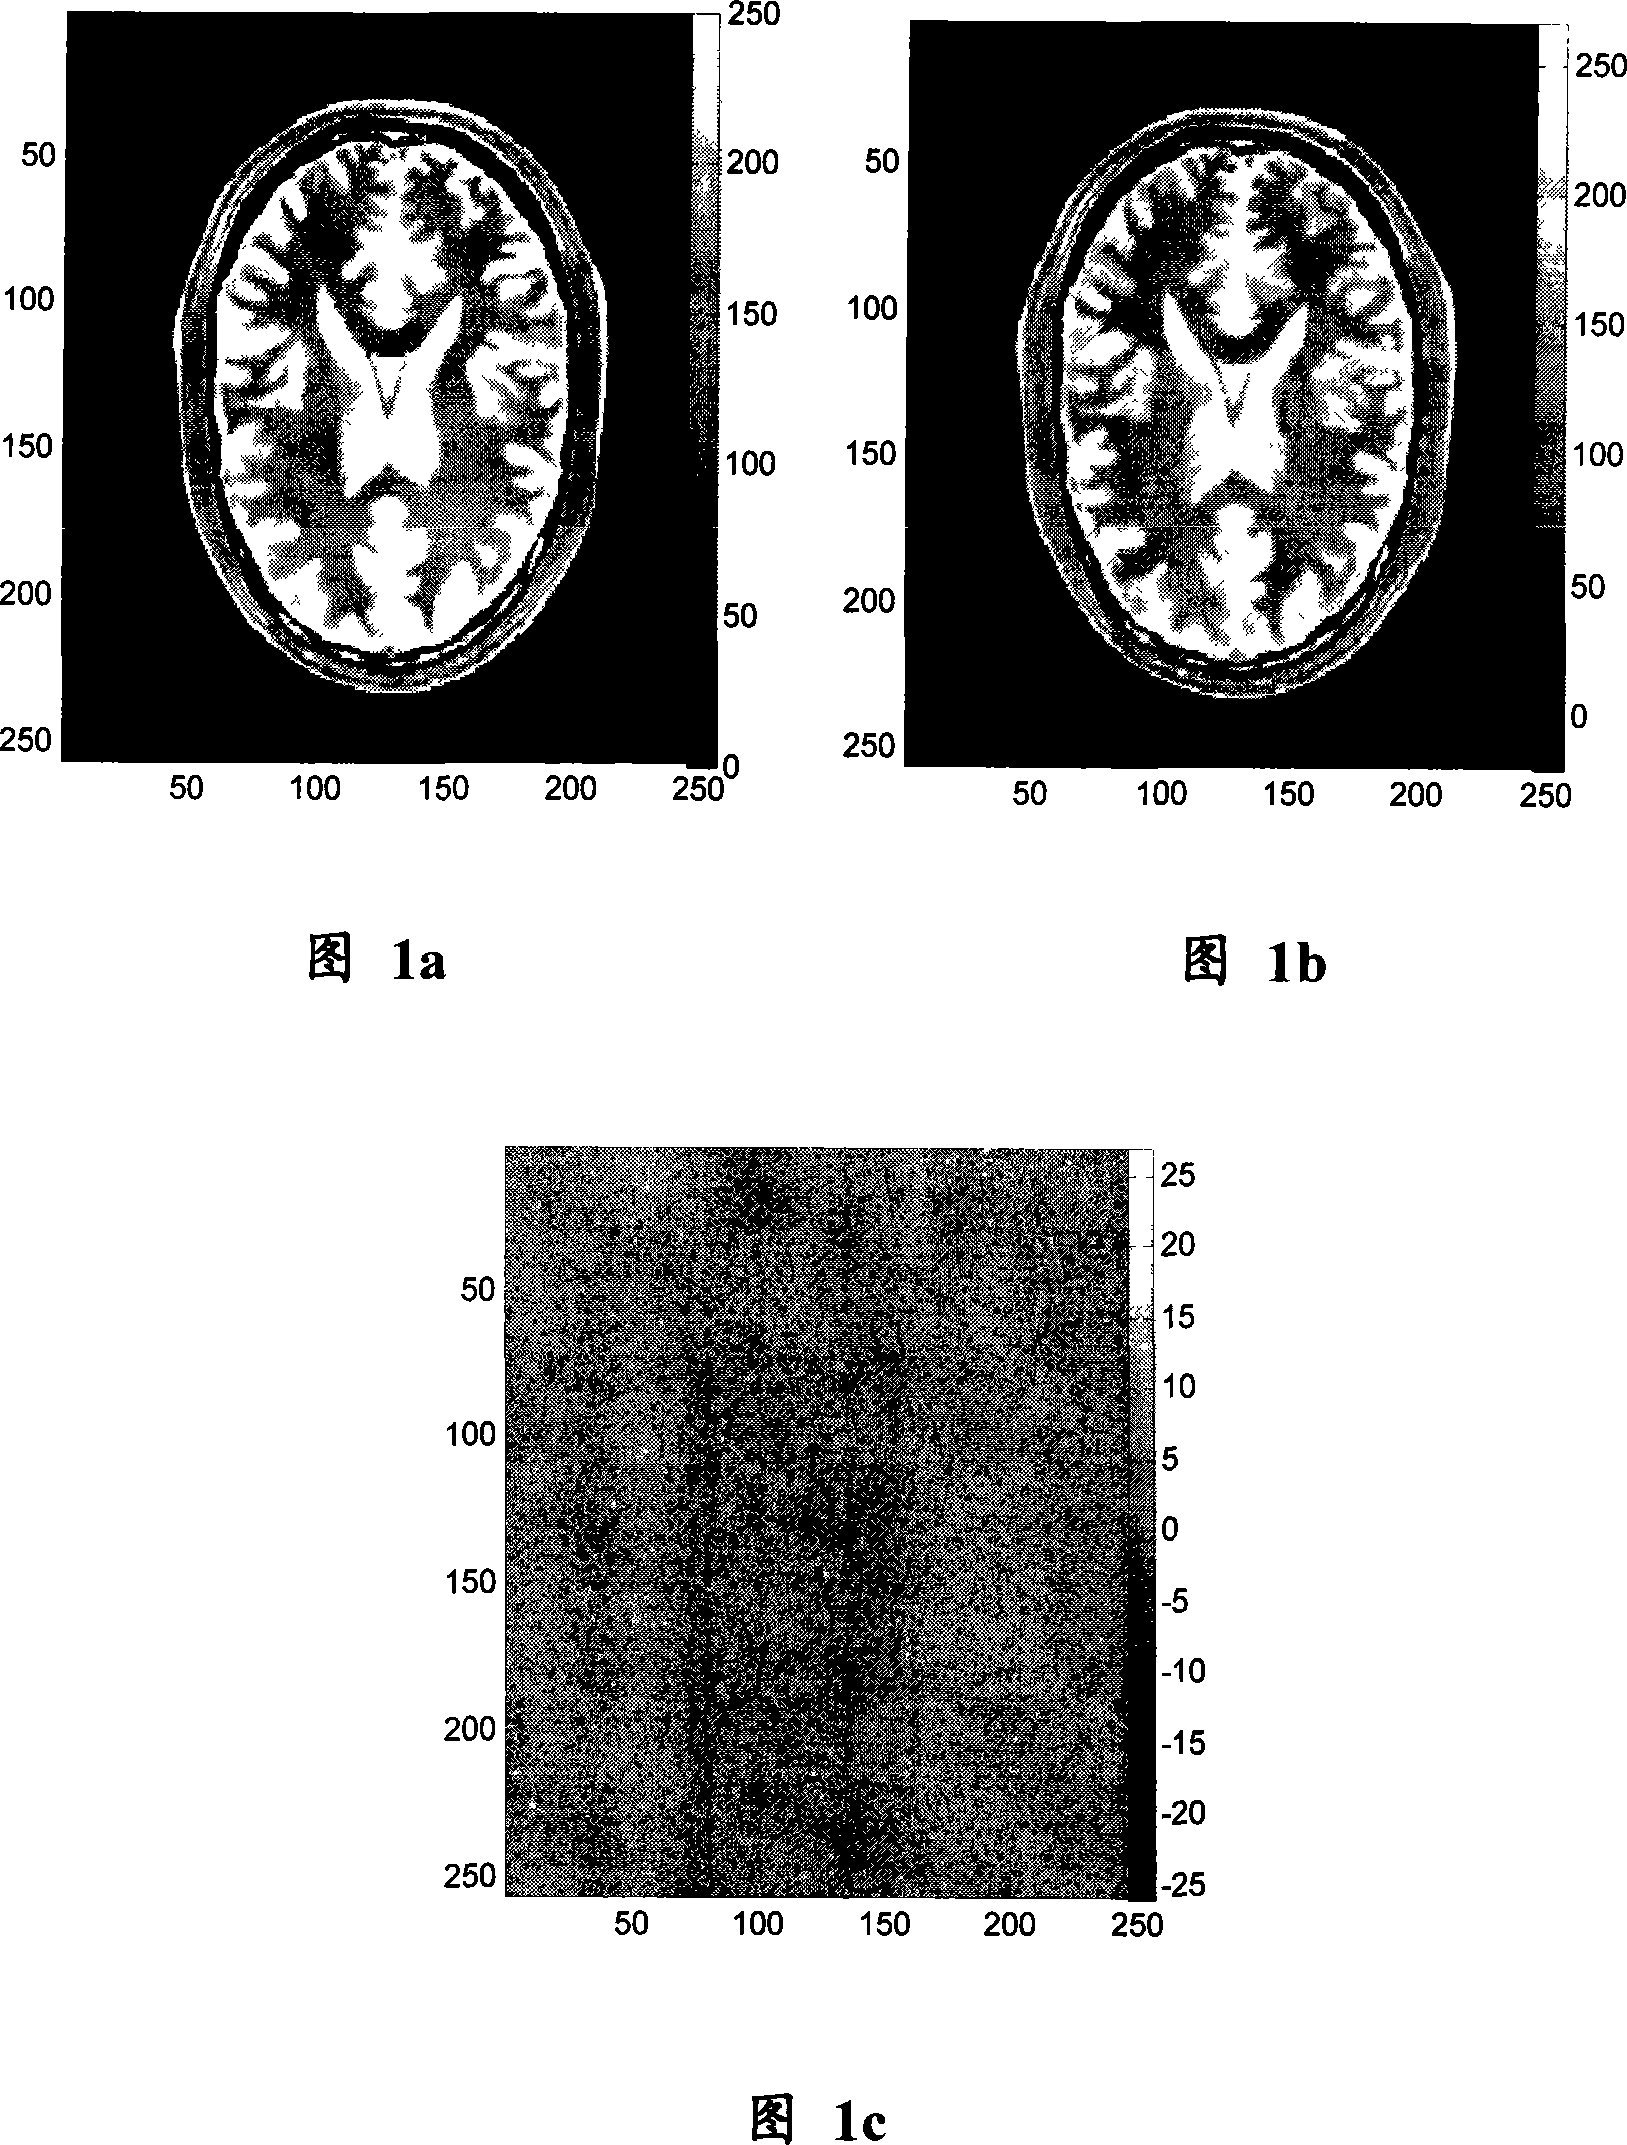 Signal noise removing method based on reconstruction signal substituting frequency spectrum data